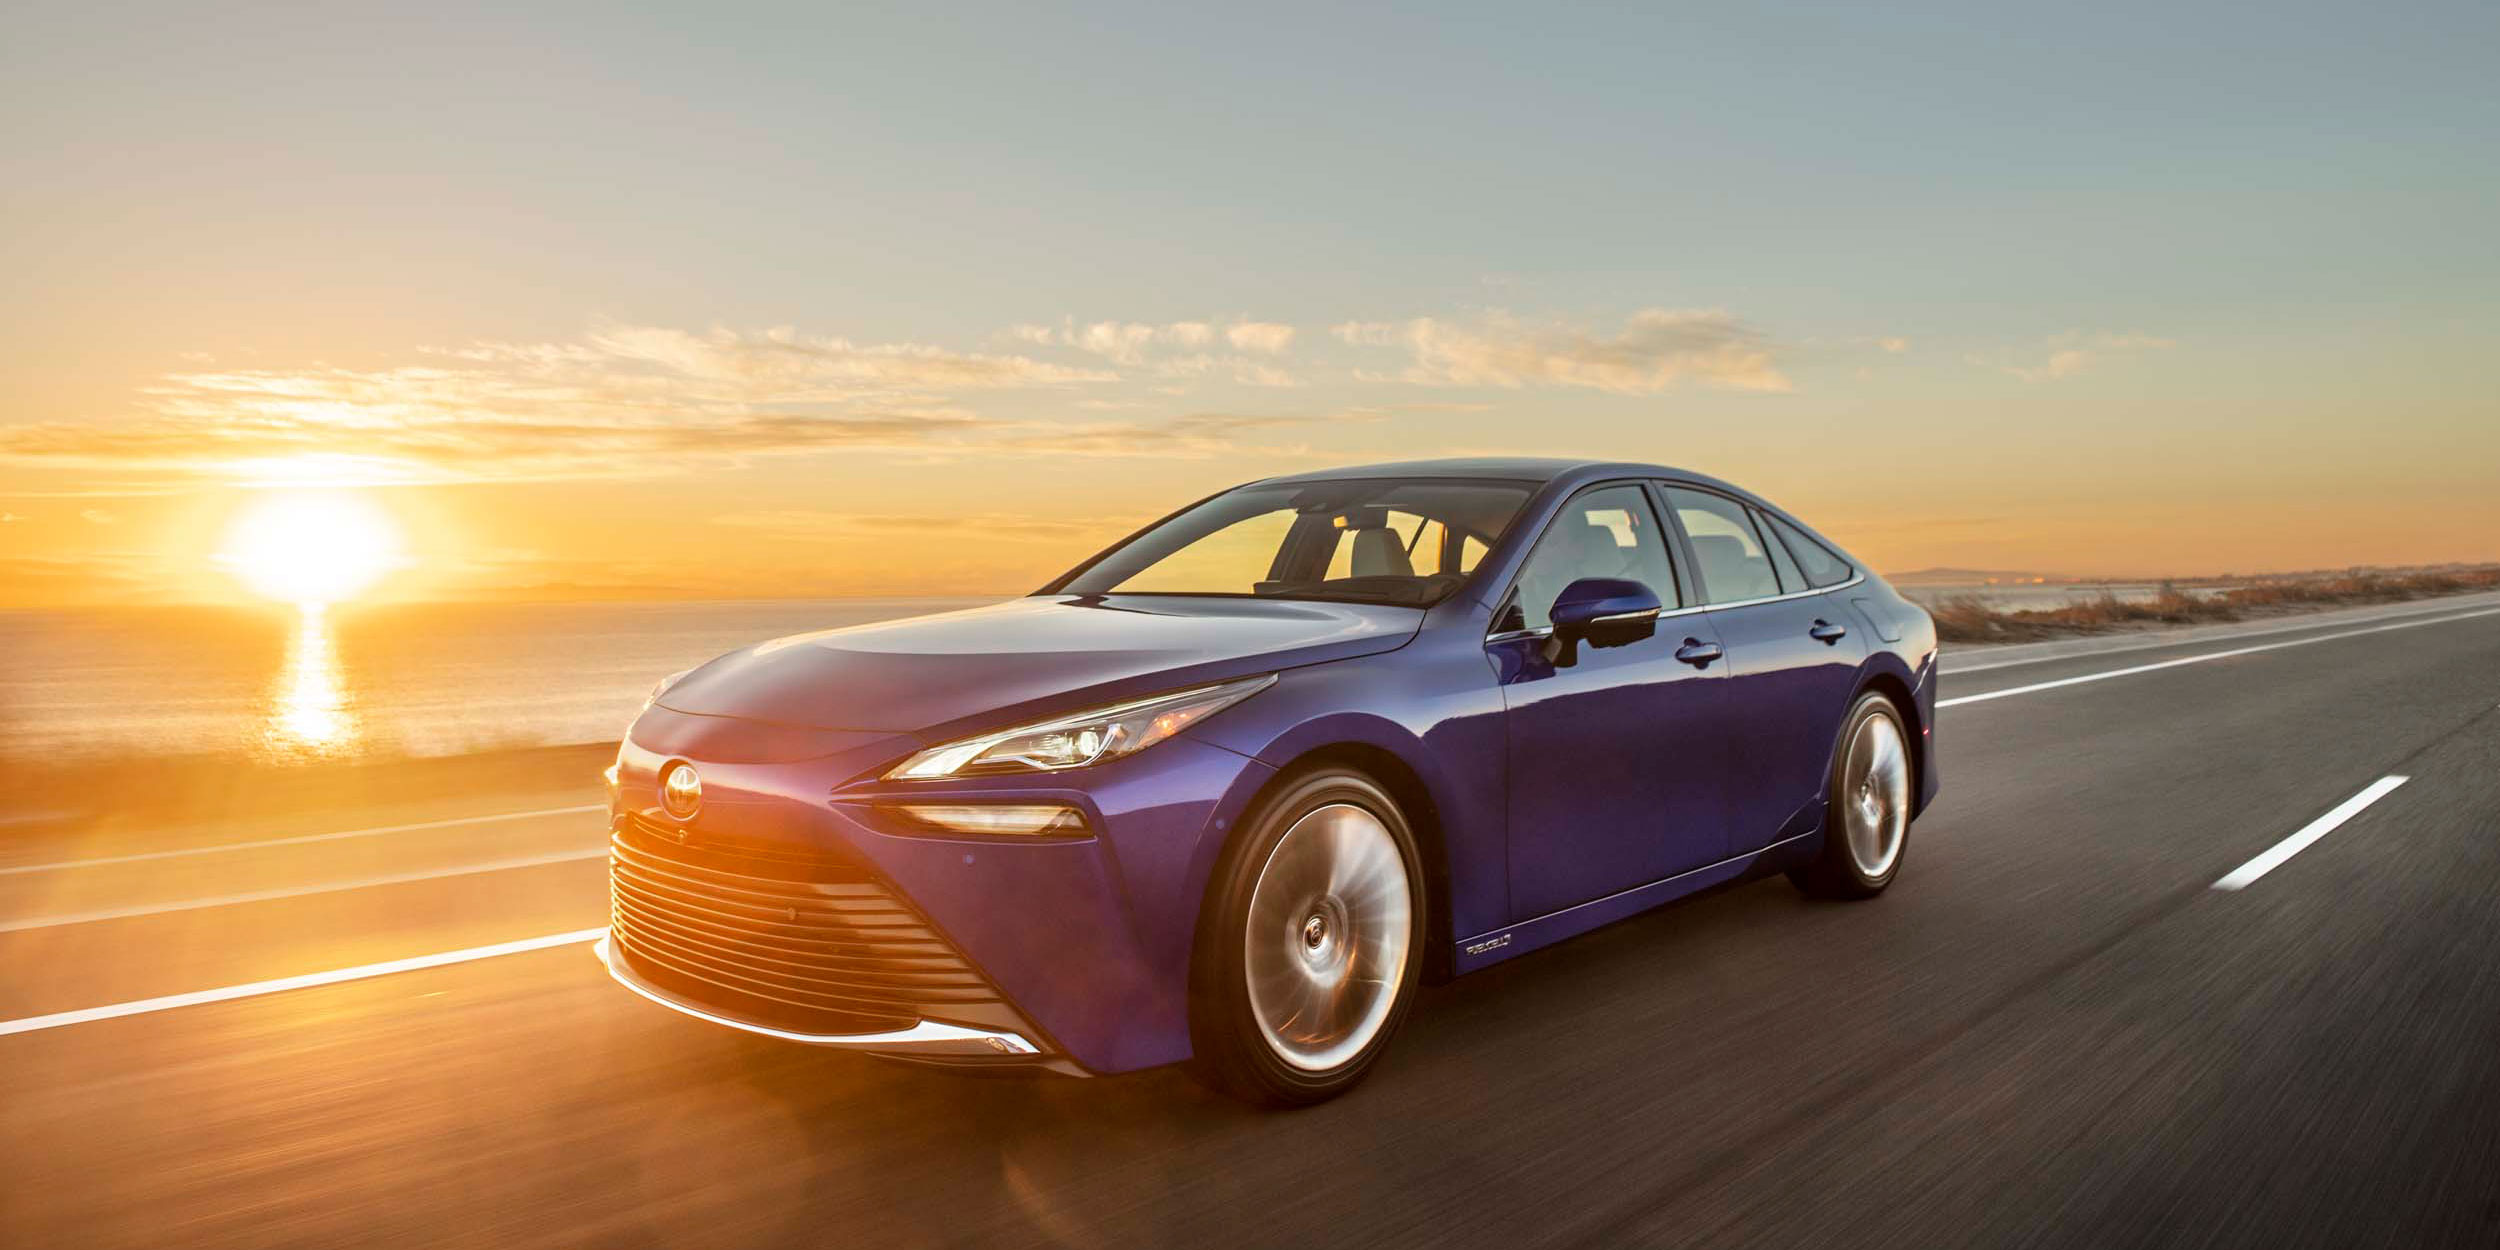 Toyota Introduces Second-Generation Mirai Fuel Cell Electric Vehicle as Design and Technology Flagship Sedan